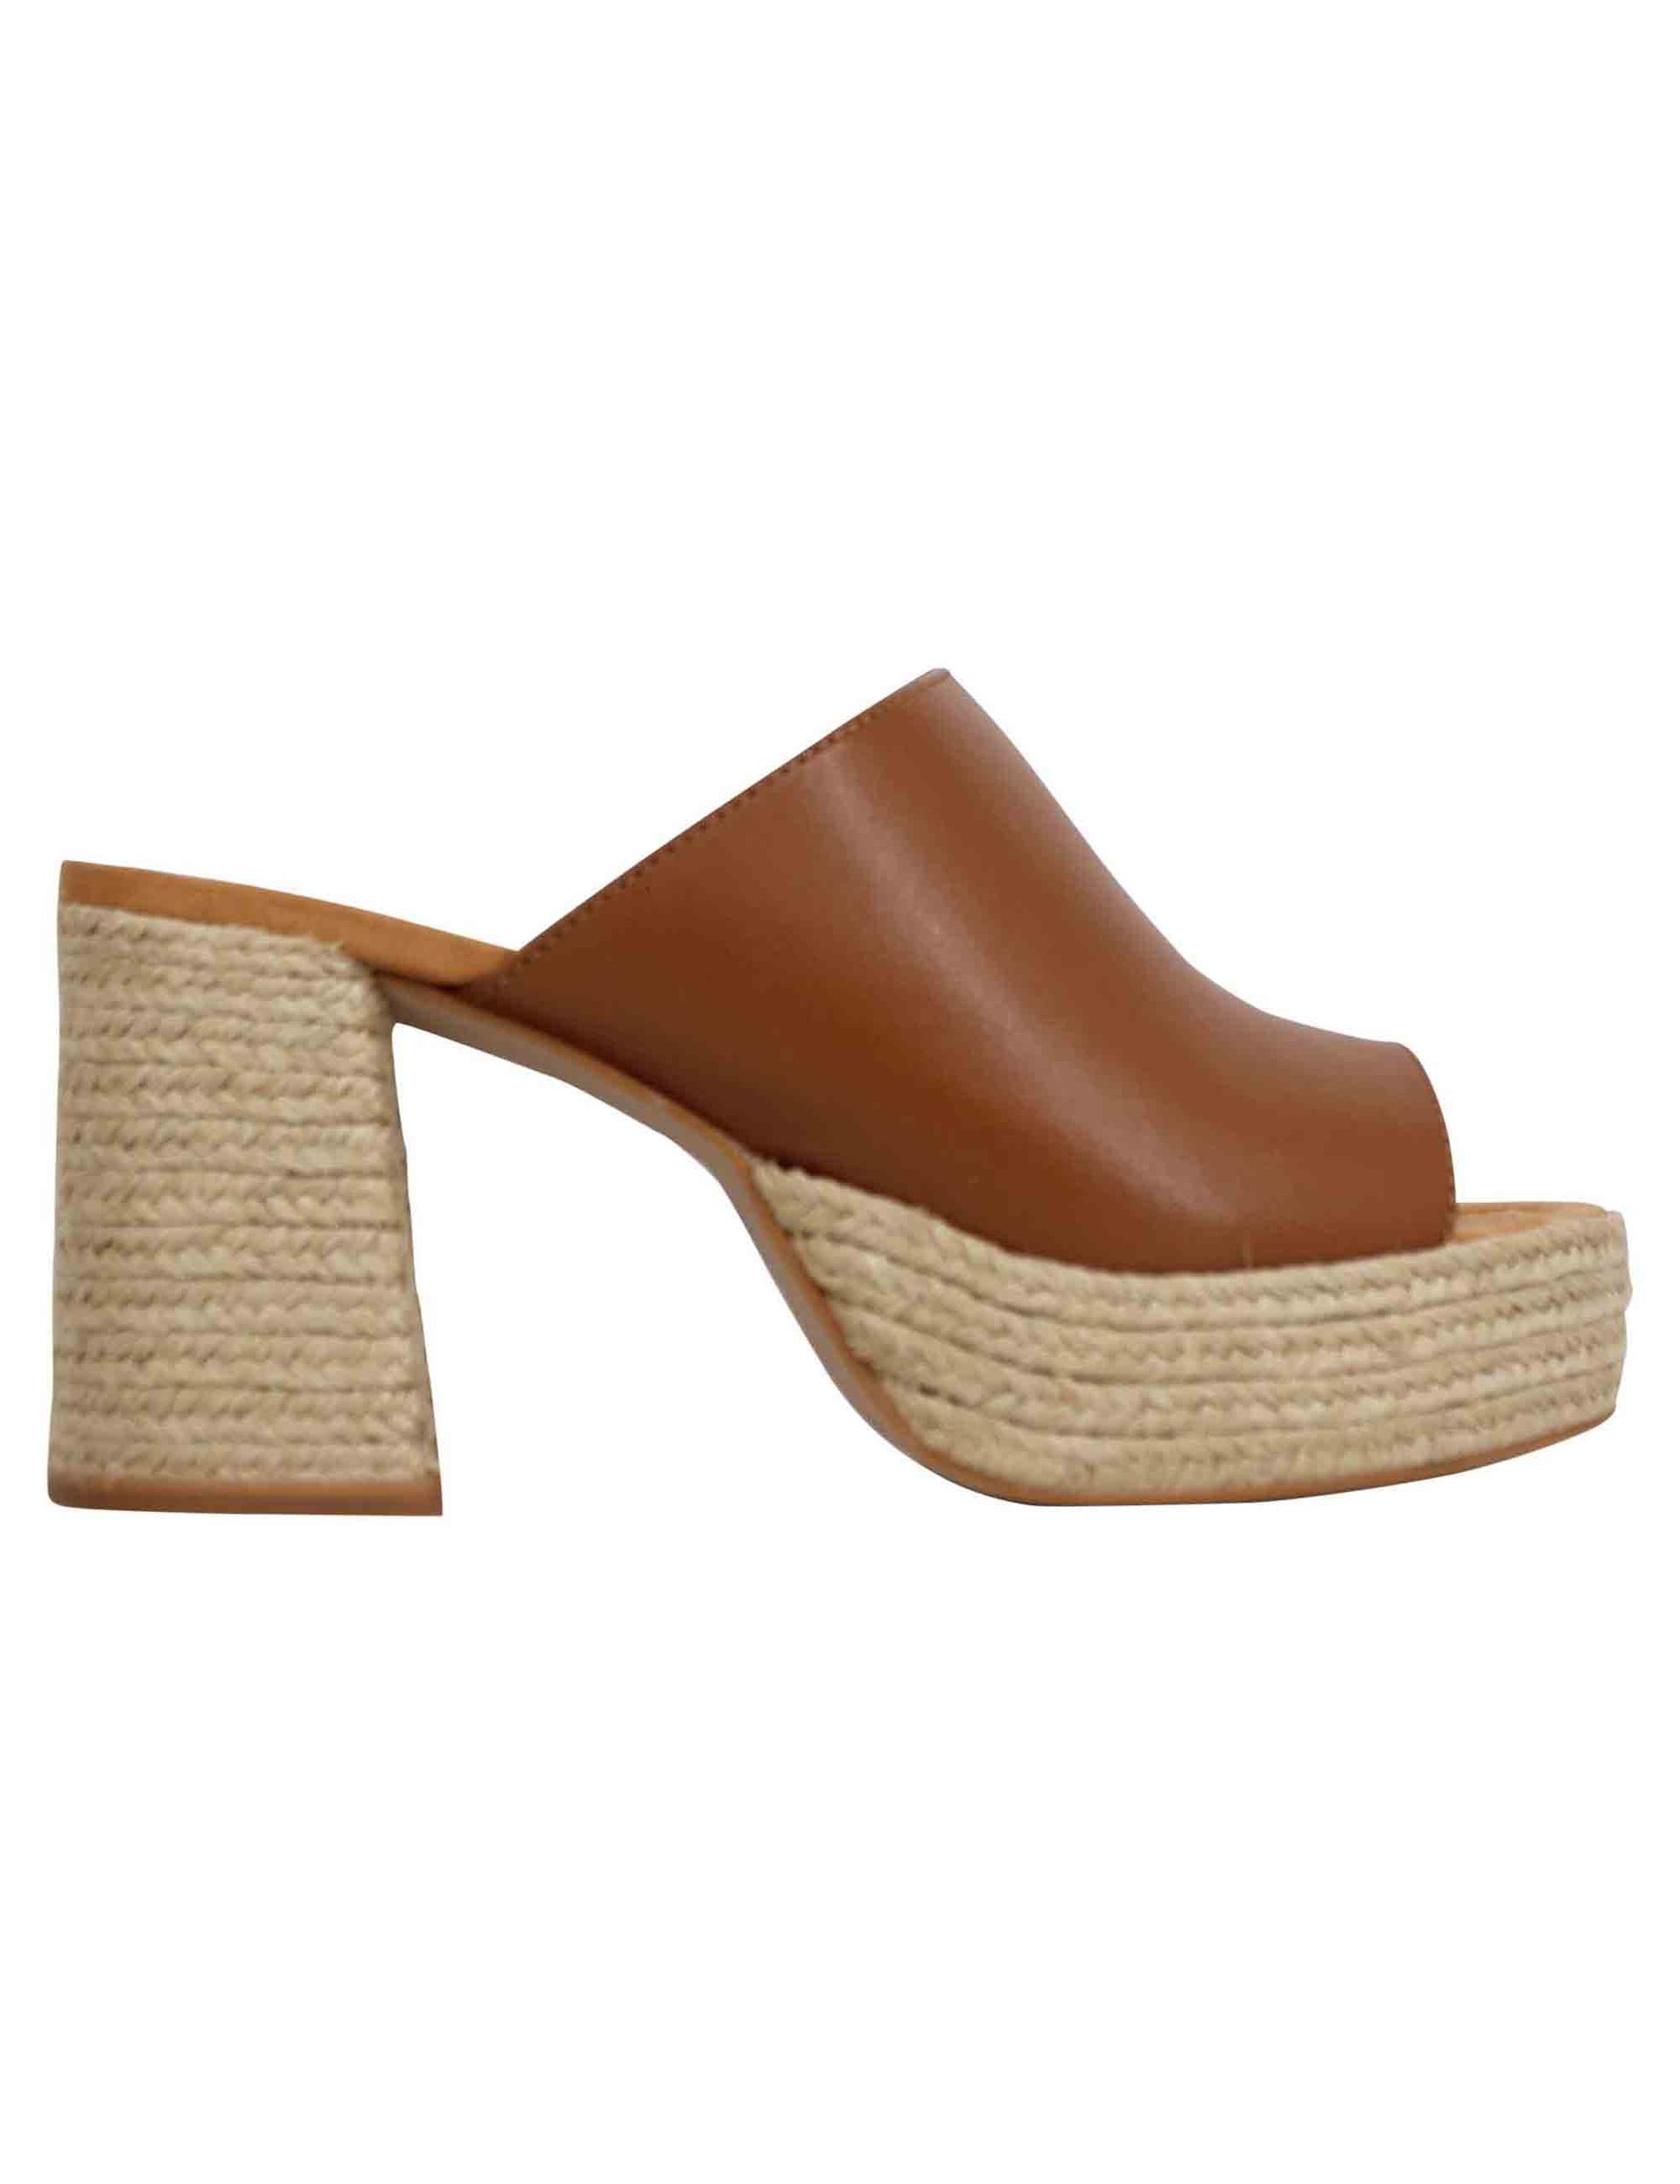 Women's sandals in tan leather with high heel and rope plateau